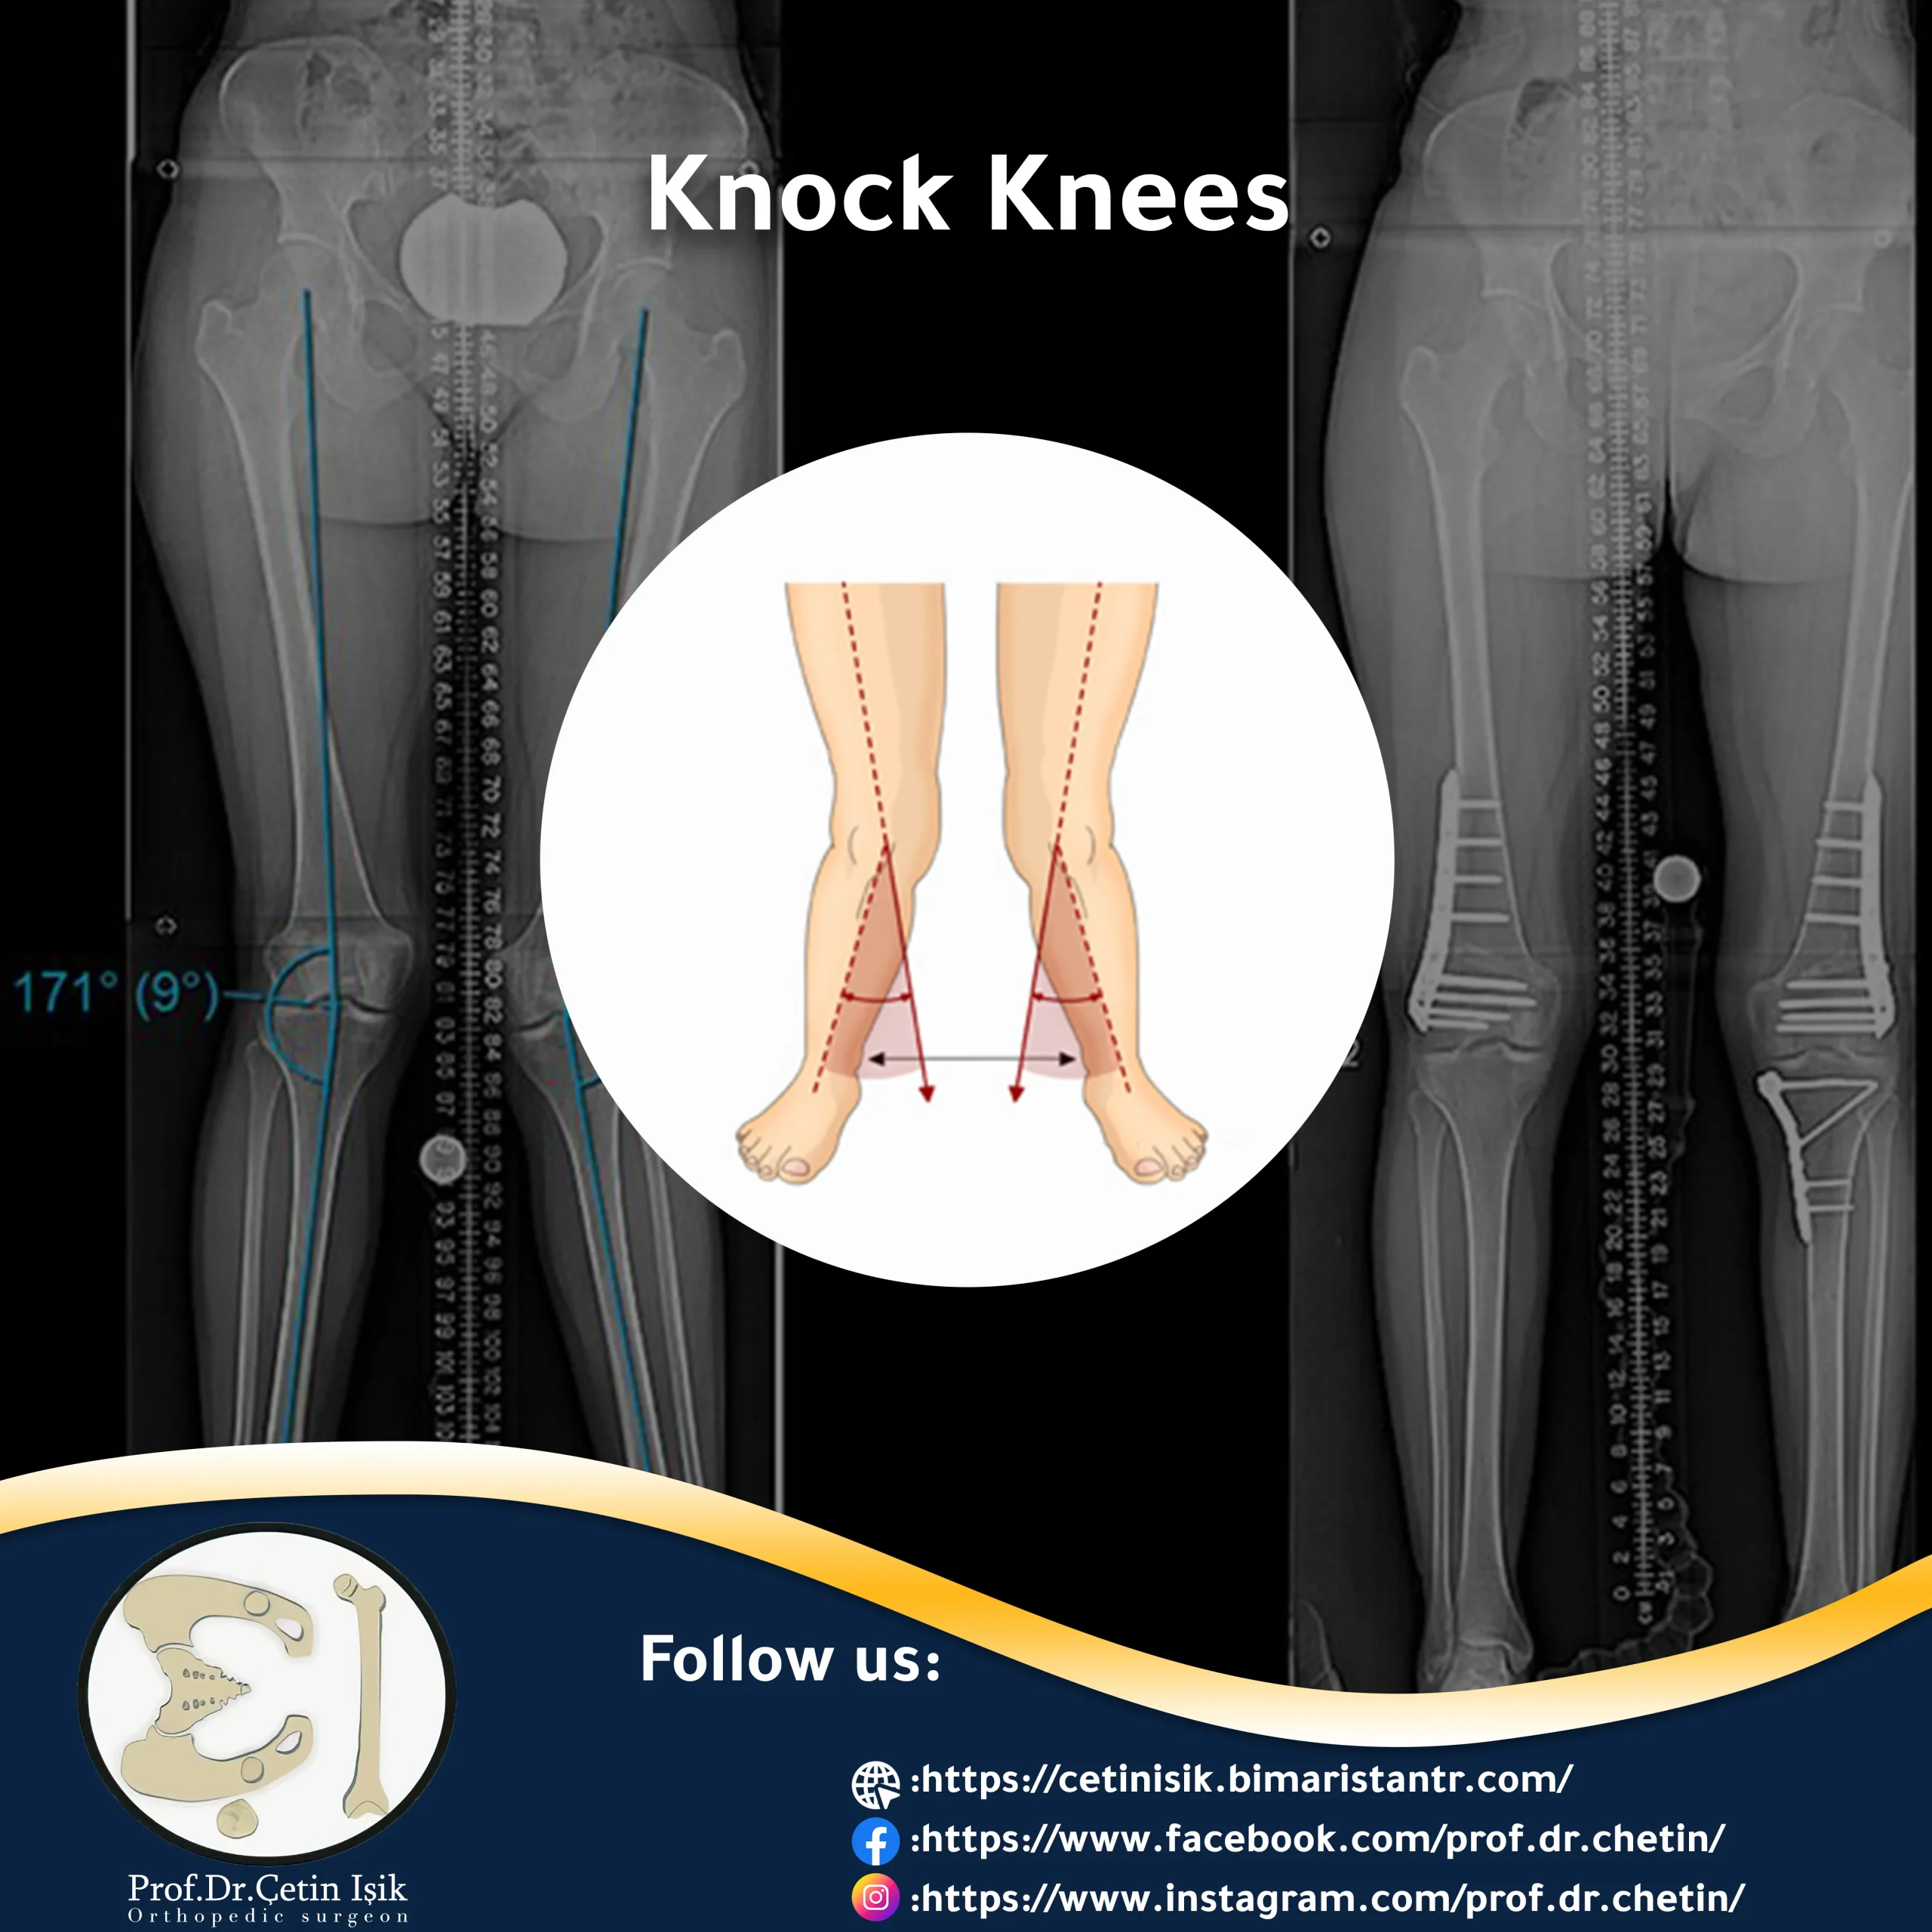 Image of the knock knees article